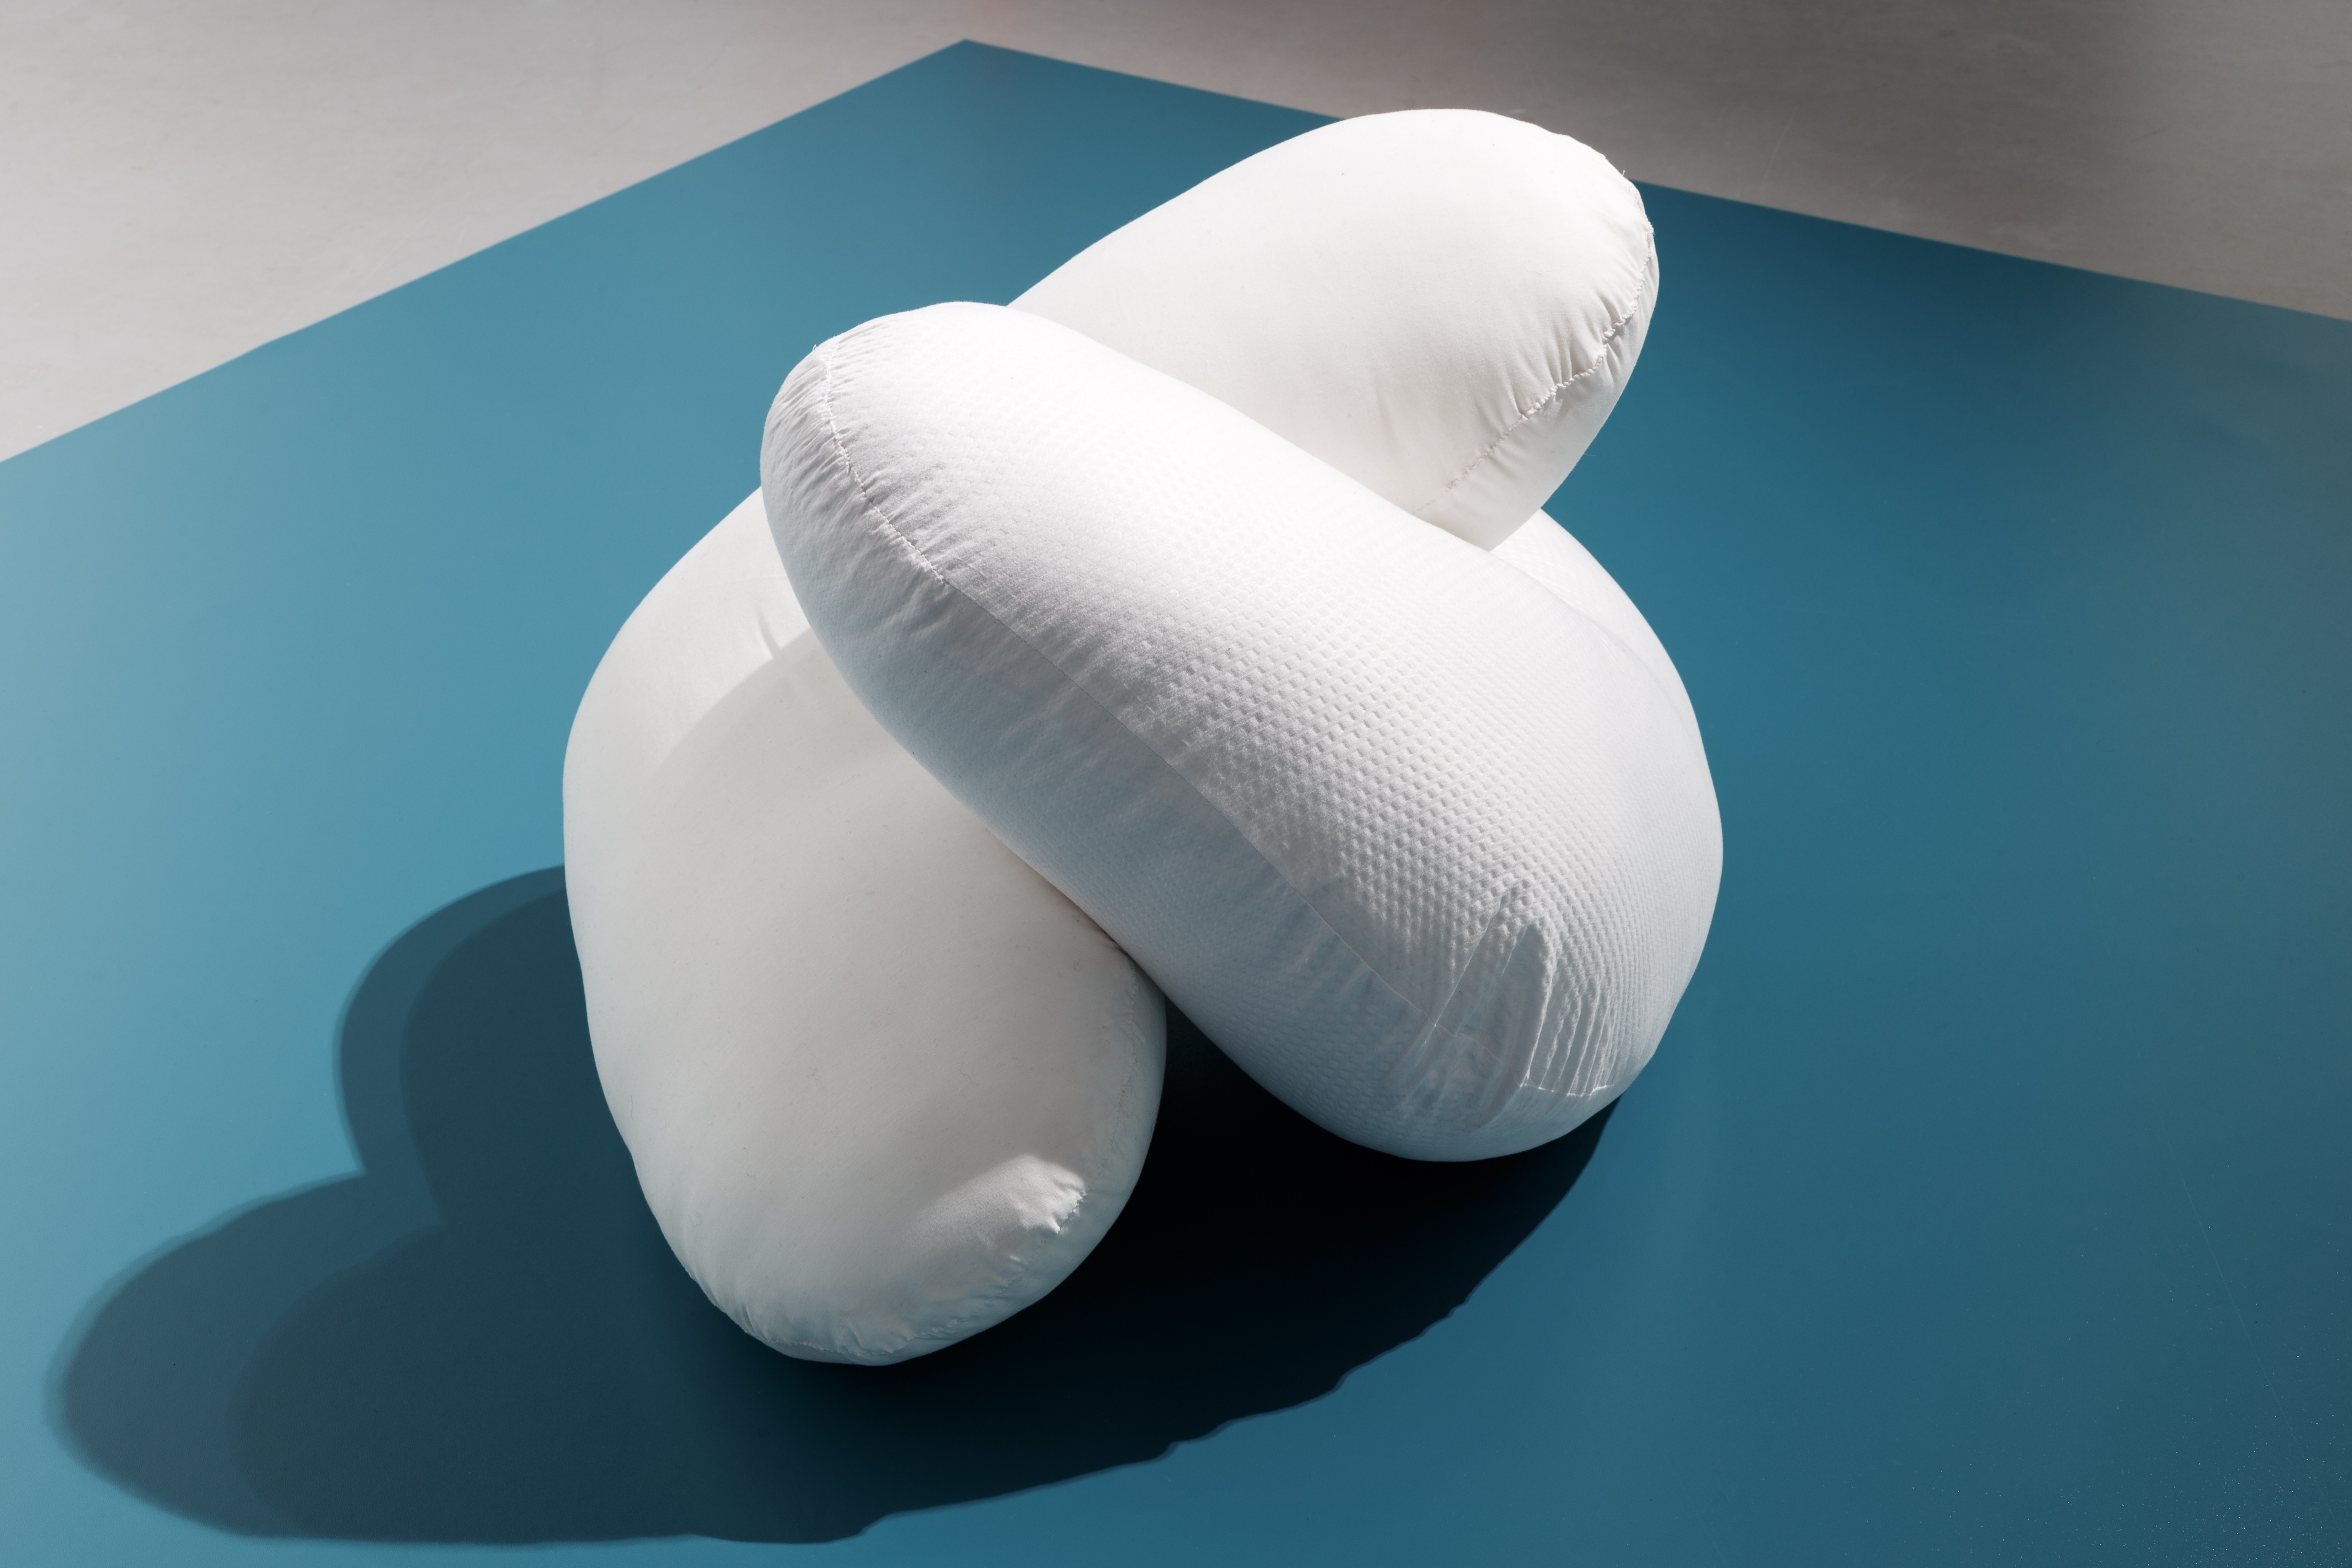 Two soft white shapes interlocking, as though embracing. They rest on a blue plinth.